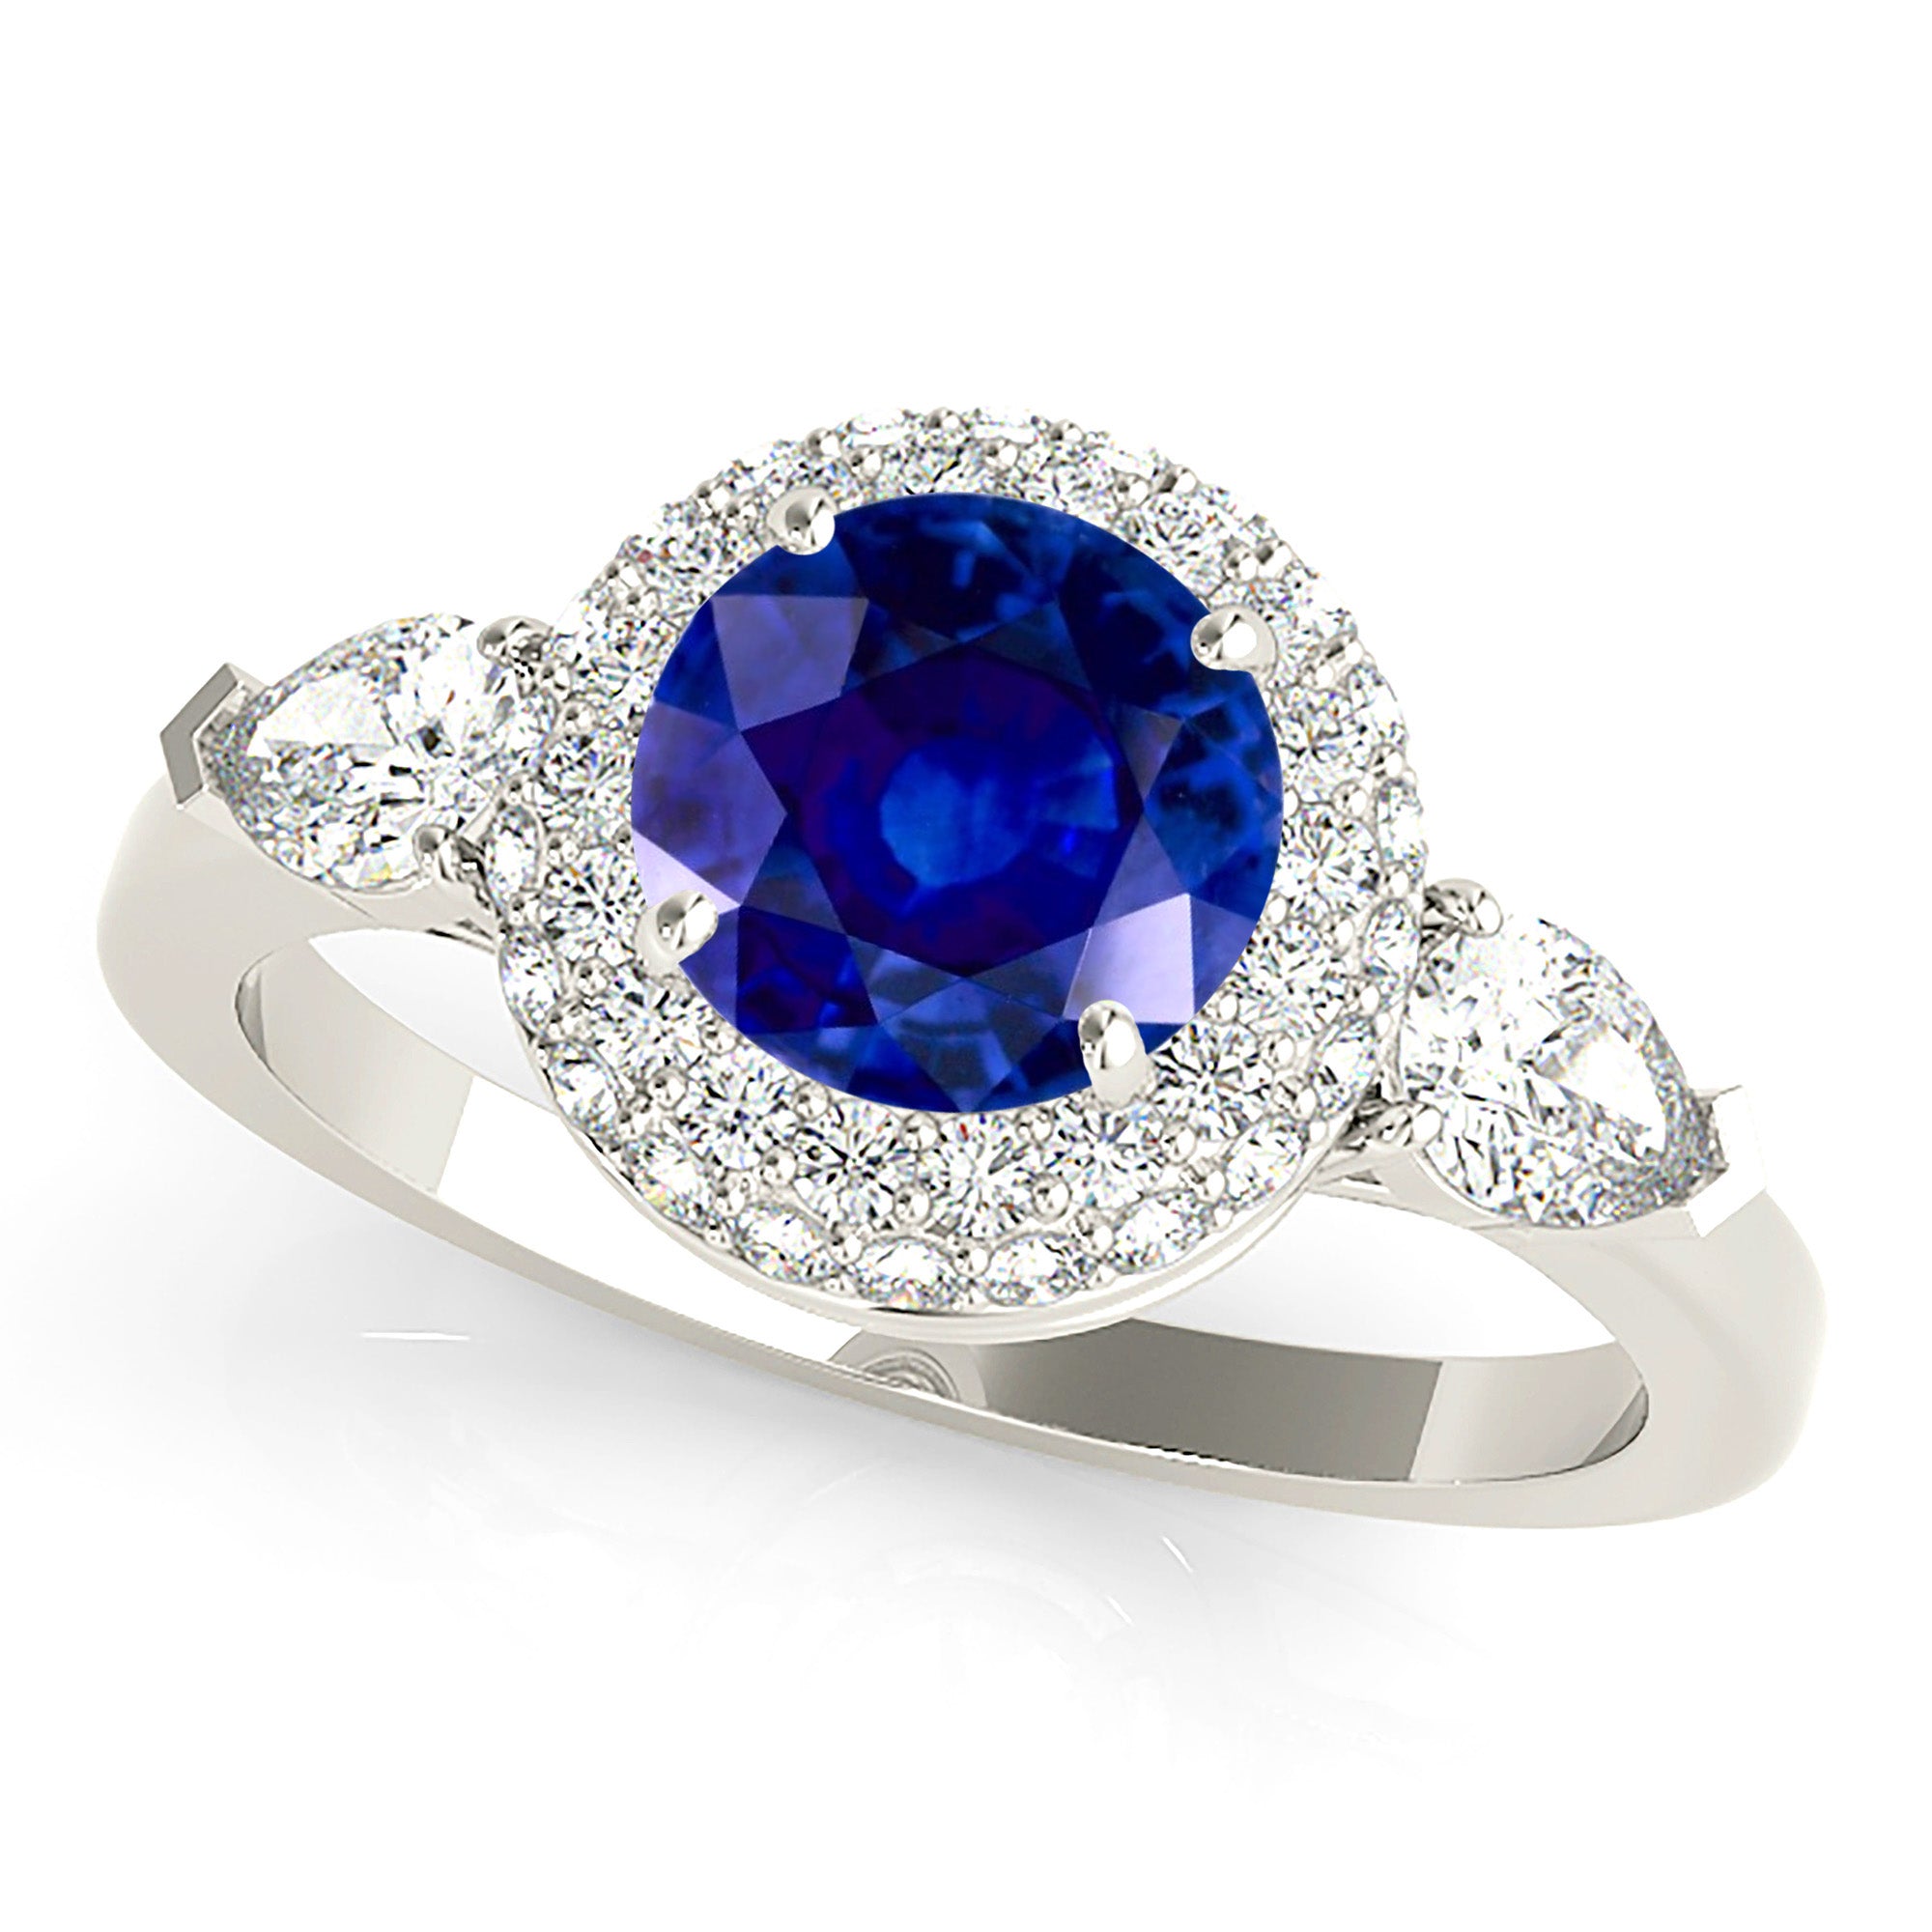 1.35 ct. Genuine Blue Sapphire Pave Set Halo Ring with 0.90 ctw. Round and Pear Shape Side Diamonds-in 14K/18K White, Yellow, Rose Gold and Platinum - Christmas Jewelry Gift -VIRABYANI